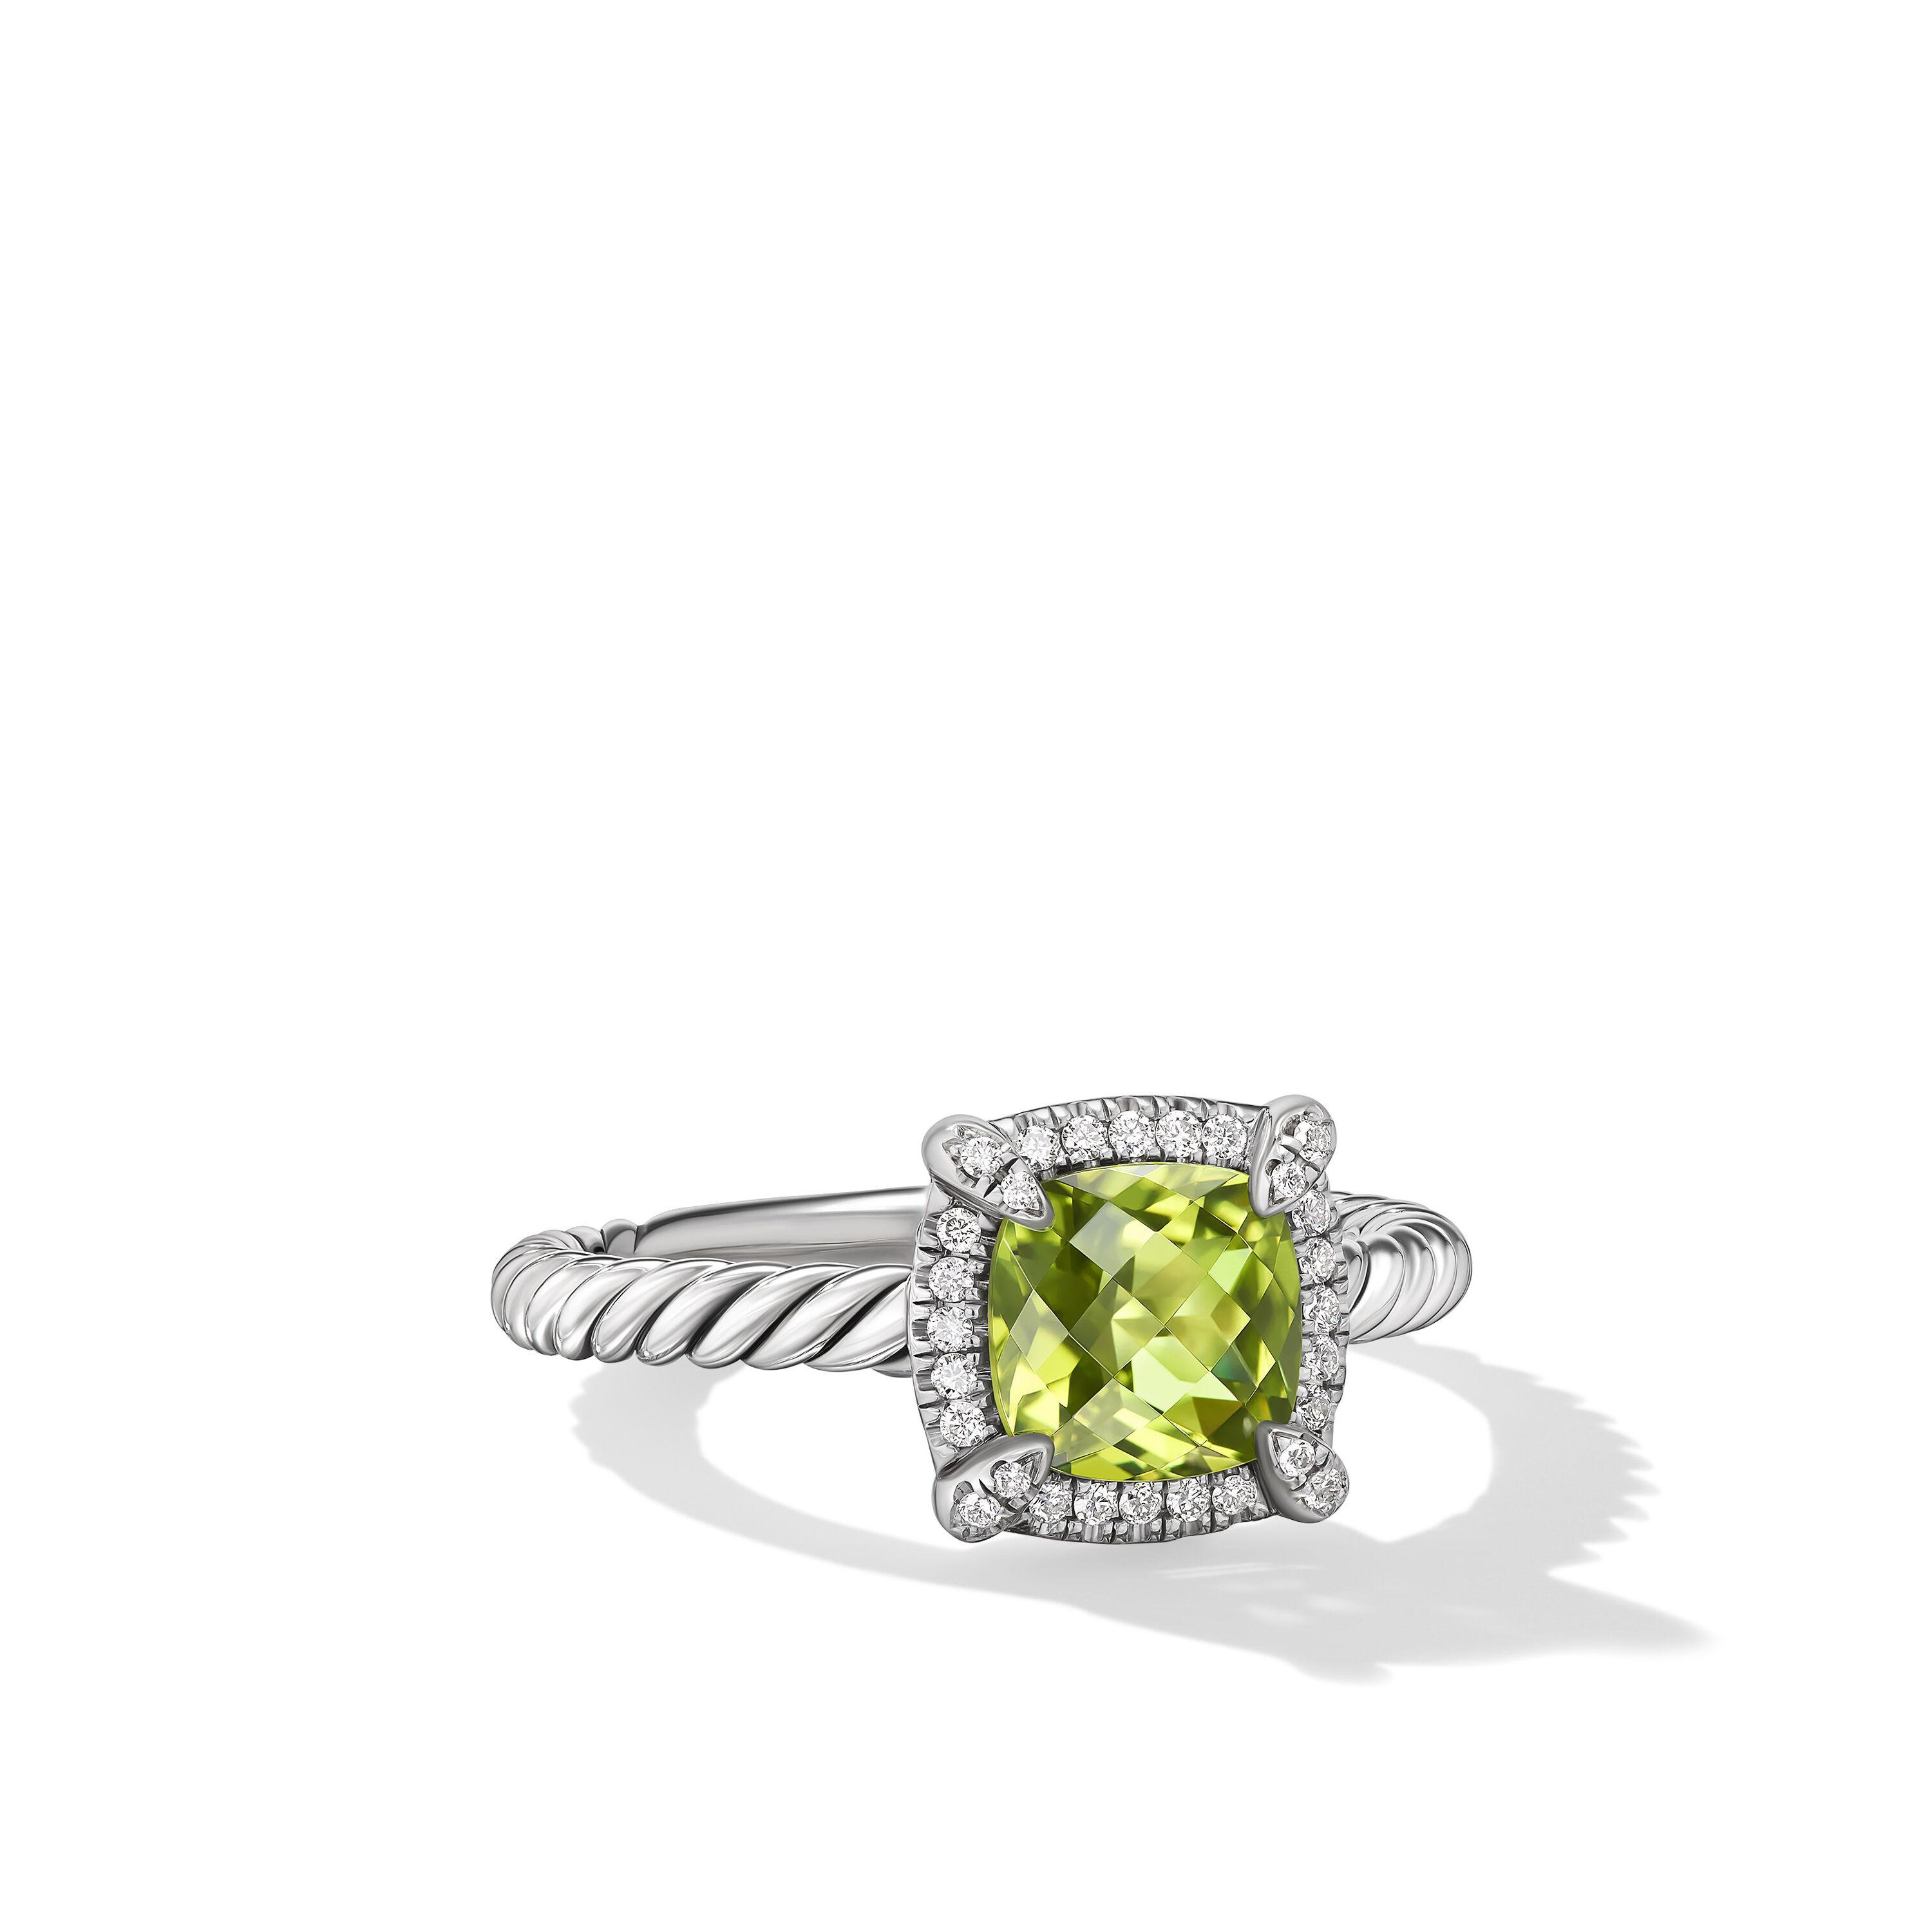 David Yurman Petite Chatelaine Pave Bezel Ring in Sterling Silver with Peridot and Diamonds, Size 5.5